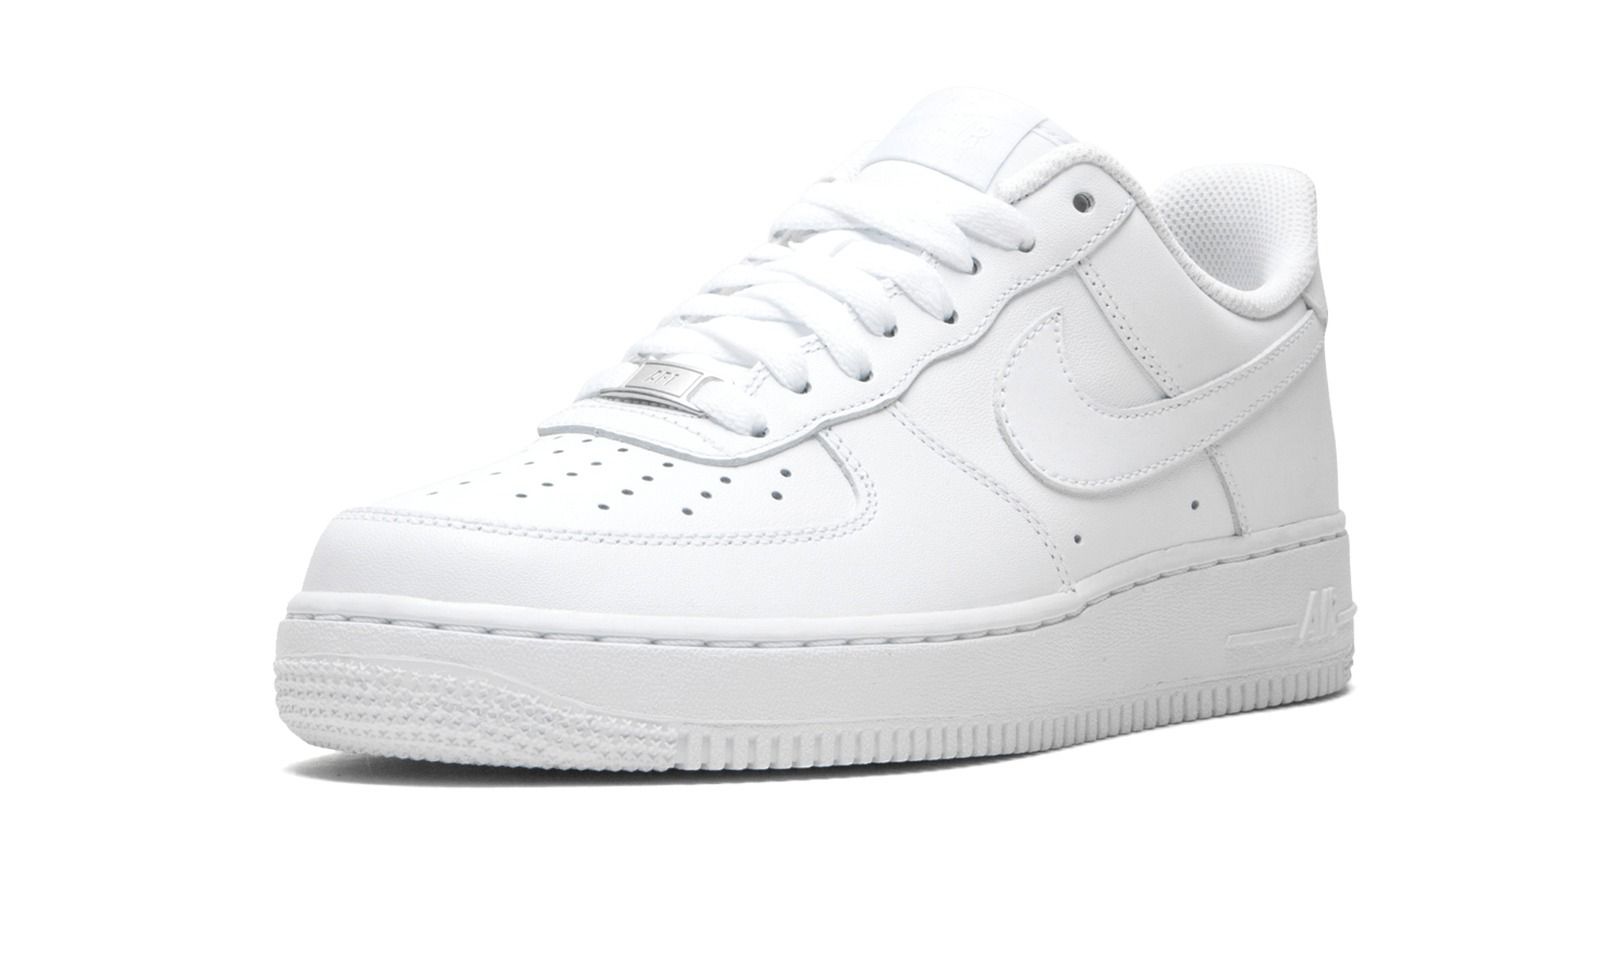  Nike Air Force 1 low White